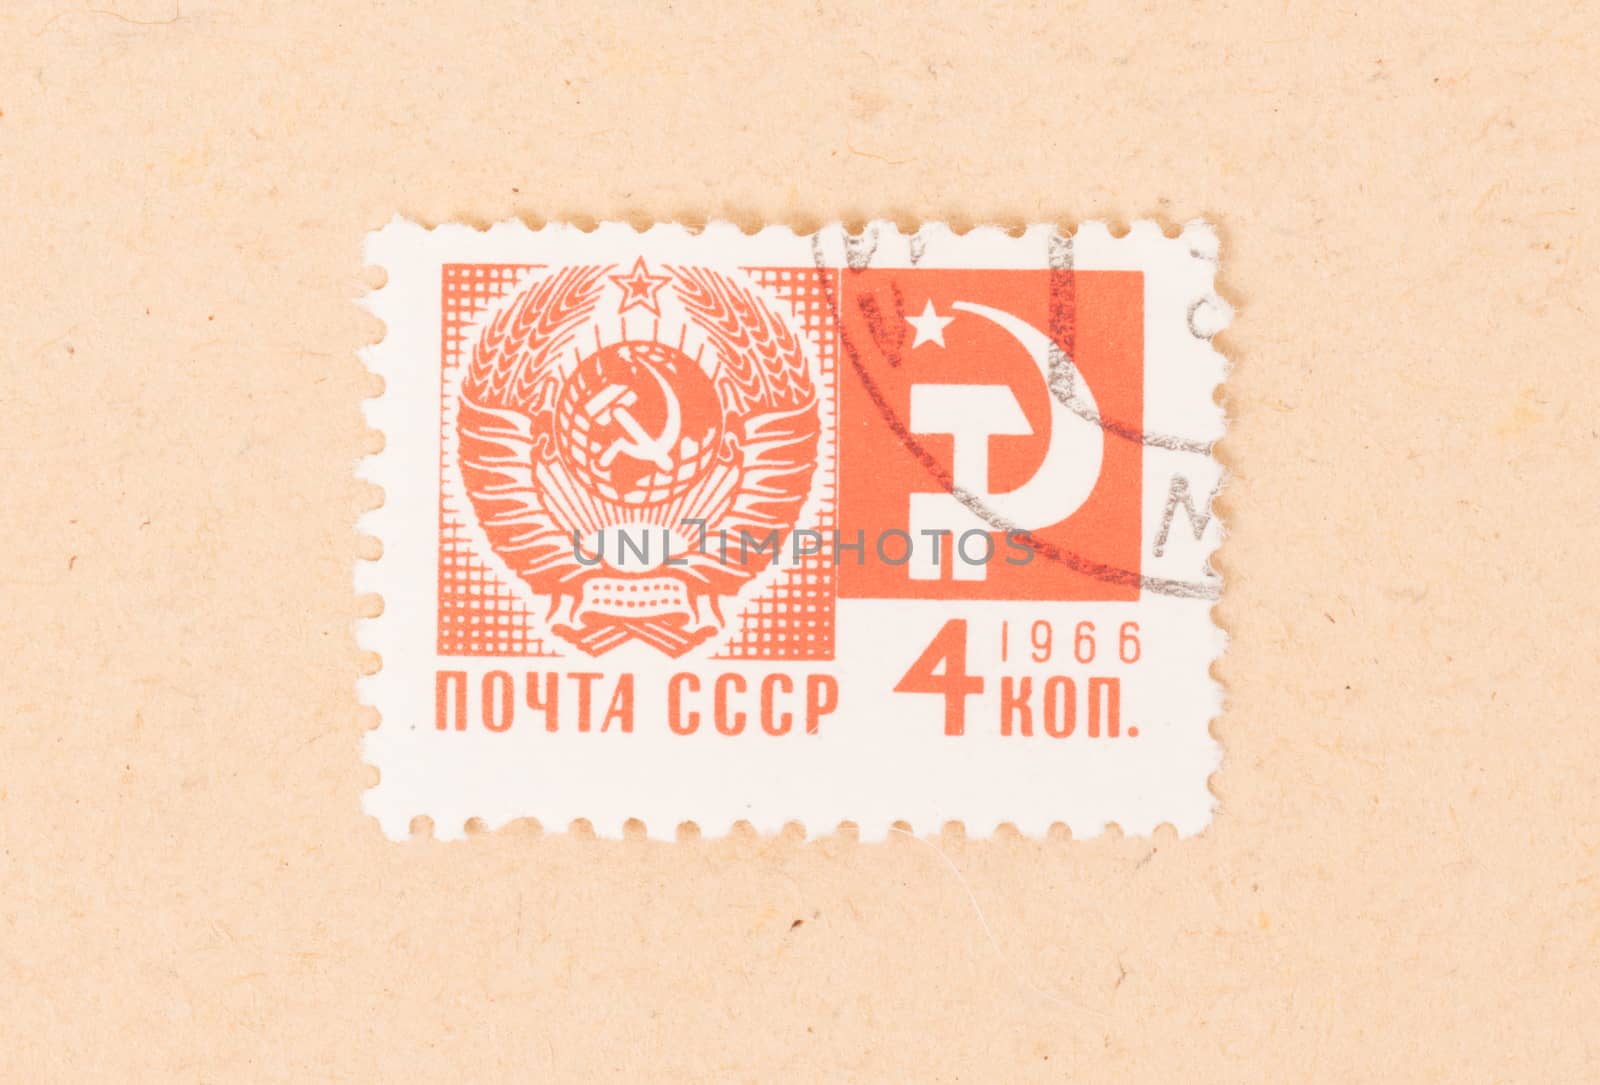 CCCP - CIRCA 1966: A stamp printed in the CCCP shows the symbol  by michaklootwijk